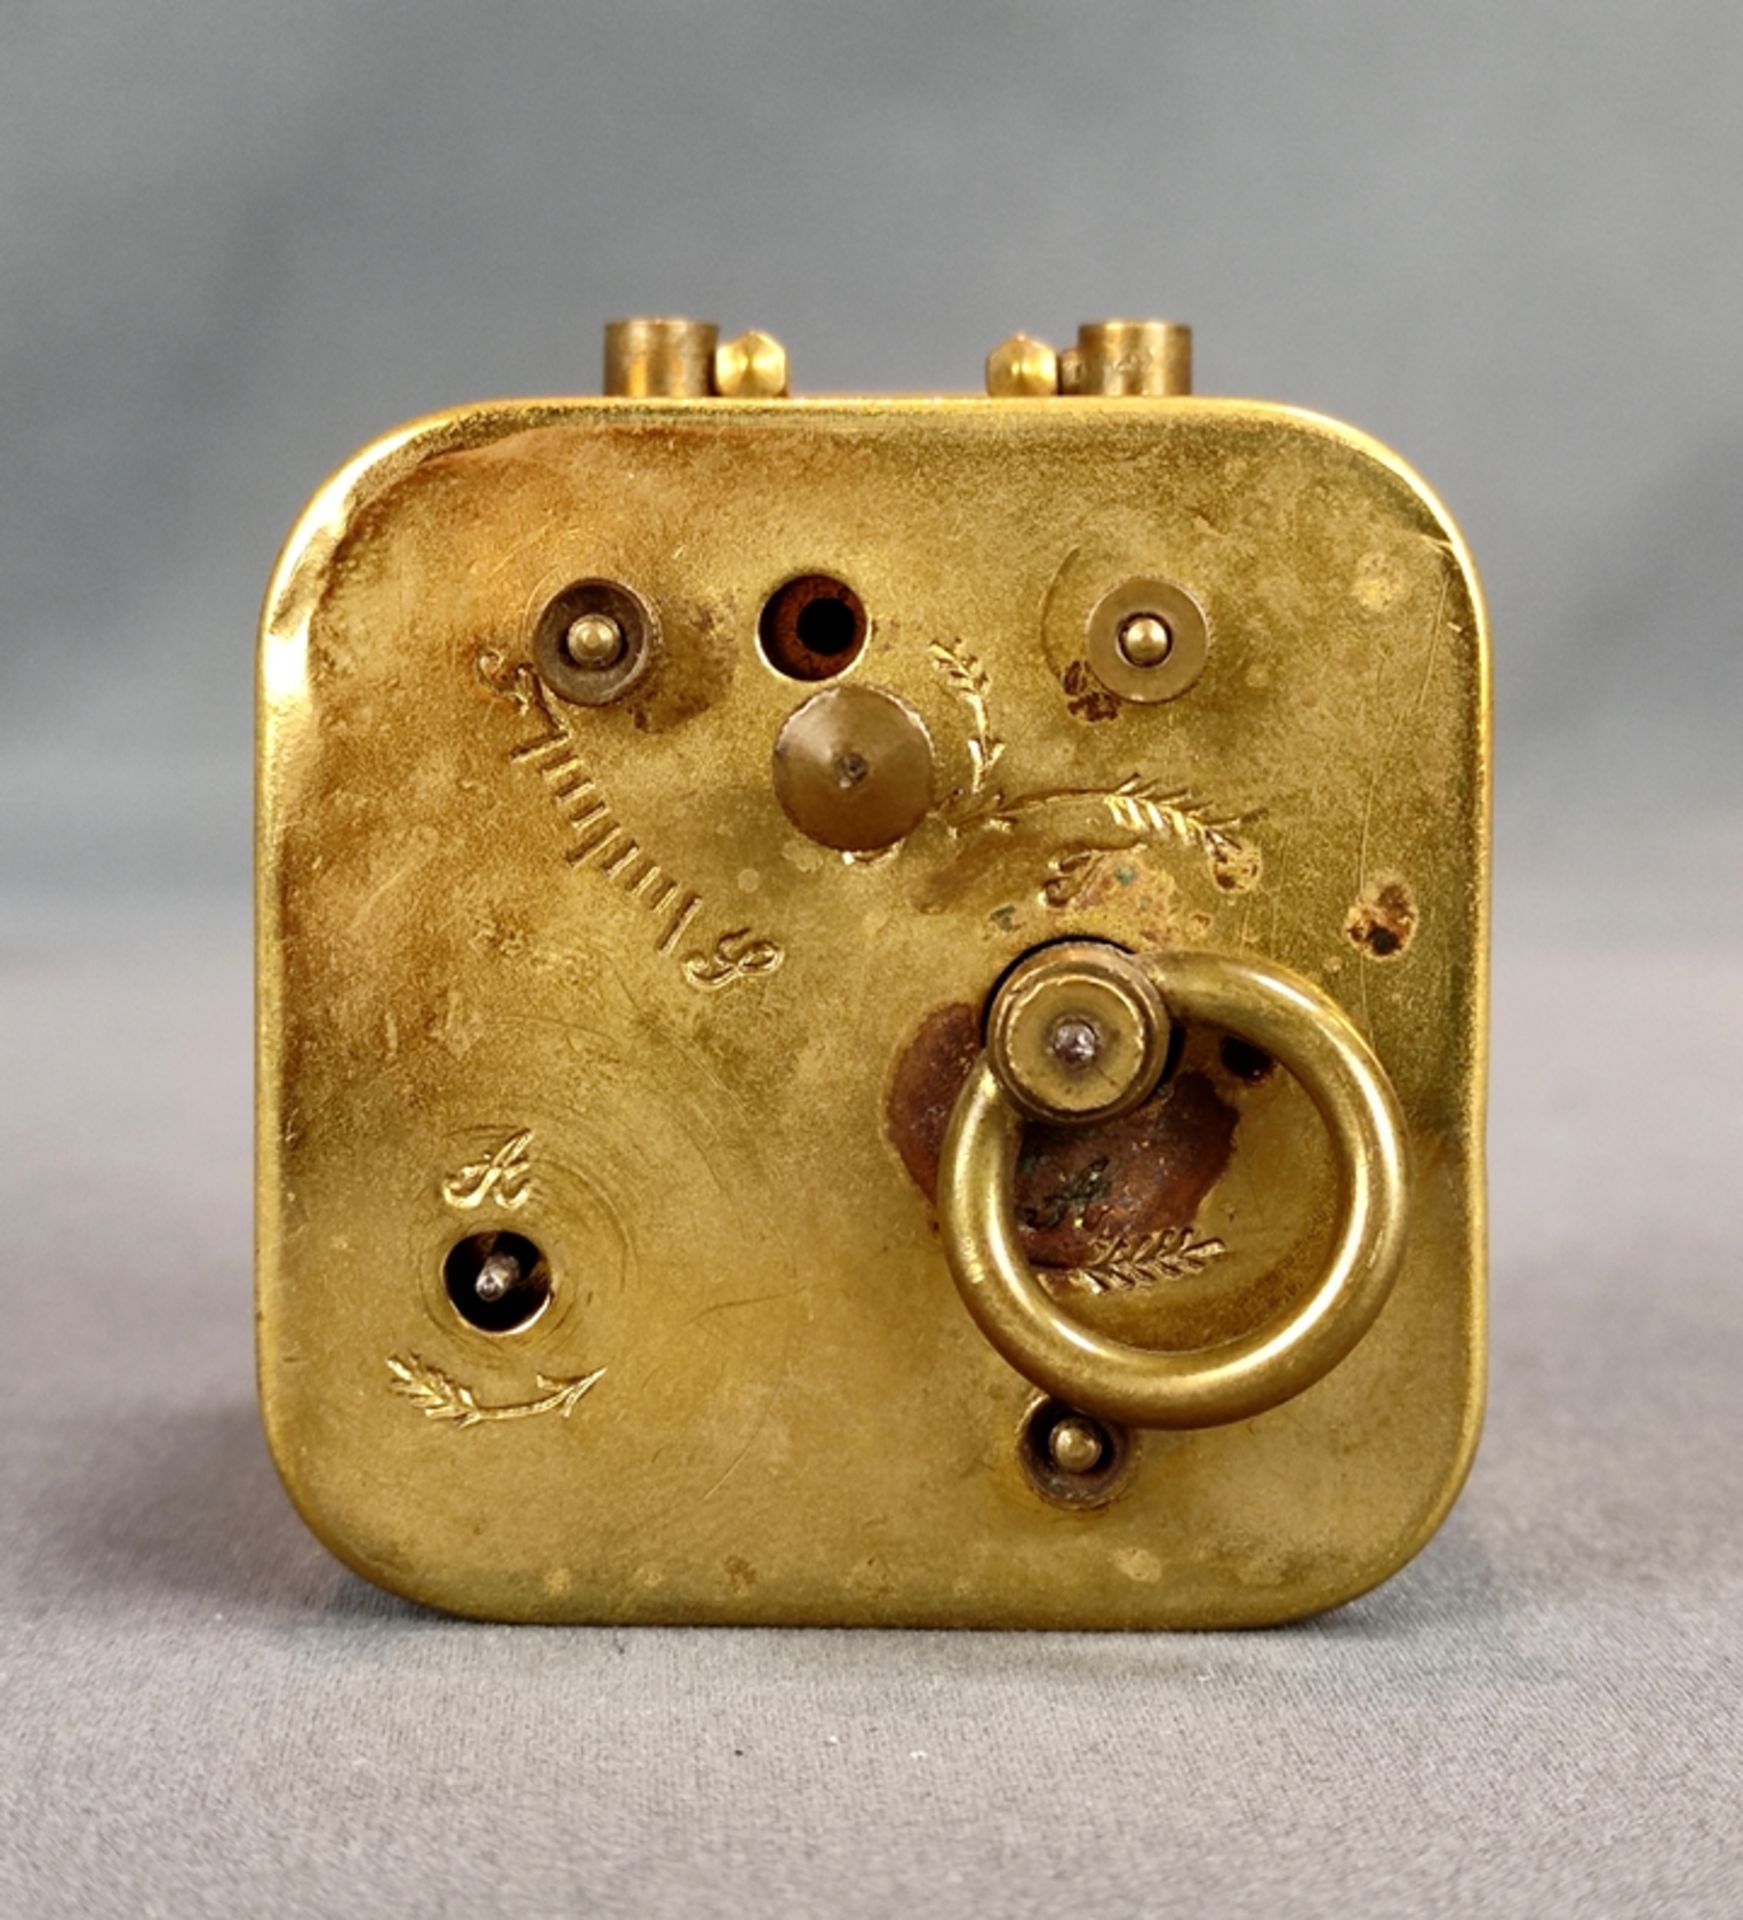 Small travel alarm clock, rectangular brass case, round dial with arabic numerals, small carrying h - Image 3 of 4